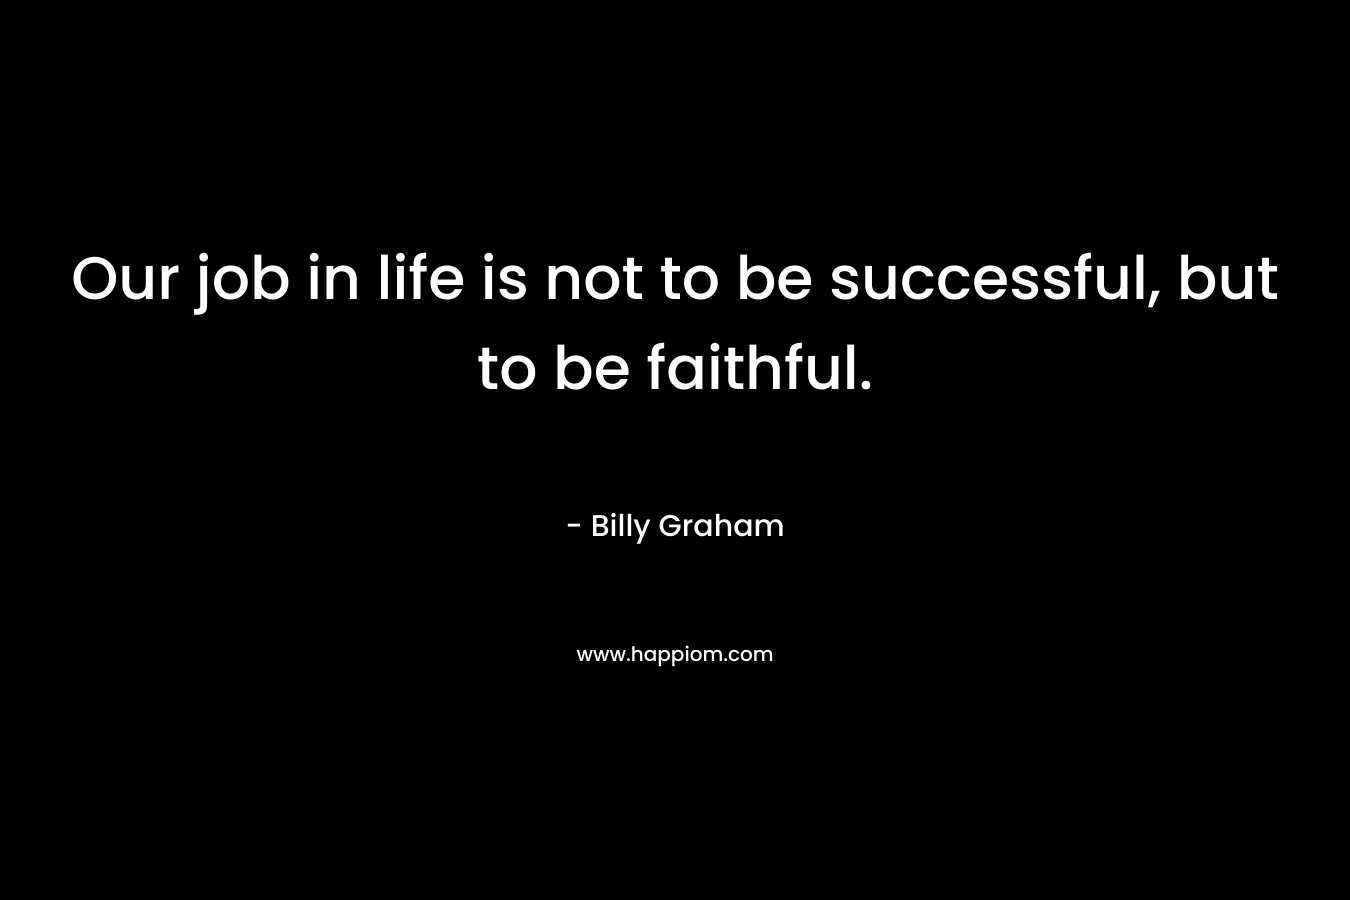 Our job in life is not to be successful, but to be faithful.